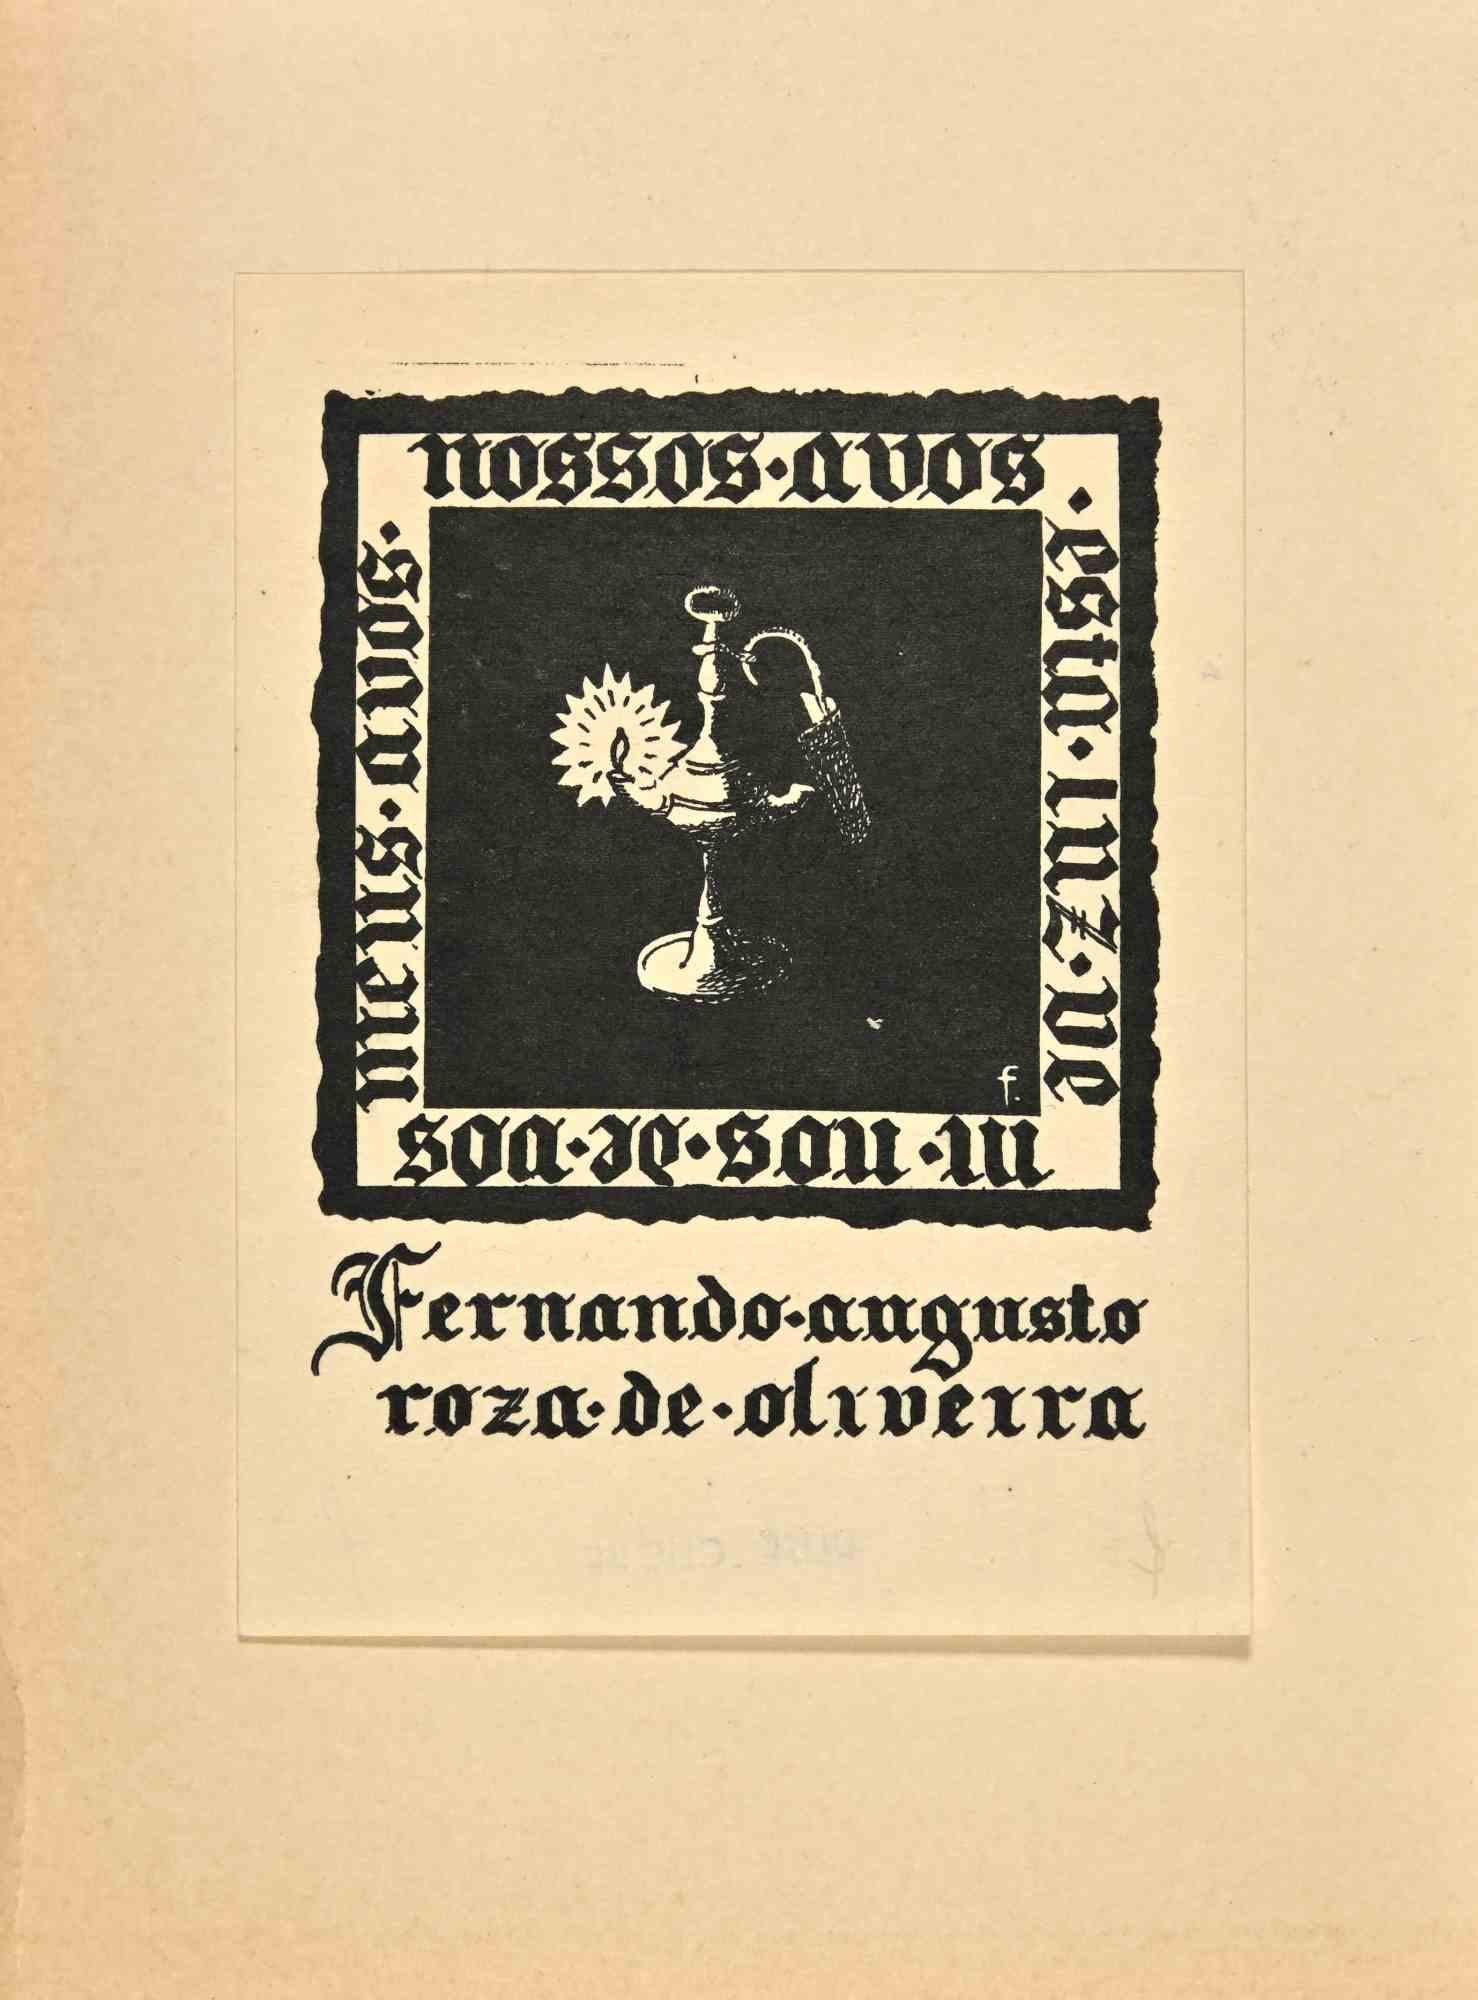 Ex-Libris  Fernando Augusto Roza de Oliveira is an Artwork realized in 1930 s., by Fernando Augusto Roza de Oliveira

Woodcut B./W. print on ivory paper. The work is glued on ivory cardboard. 

Total dimensions: 20 x 15 cm.

Good conditions.

 The